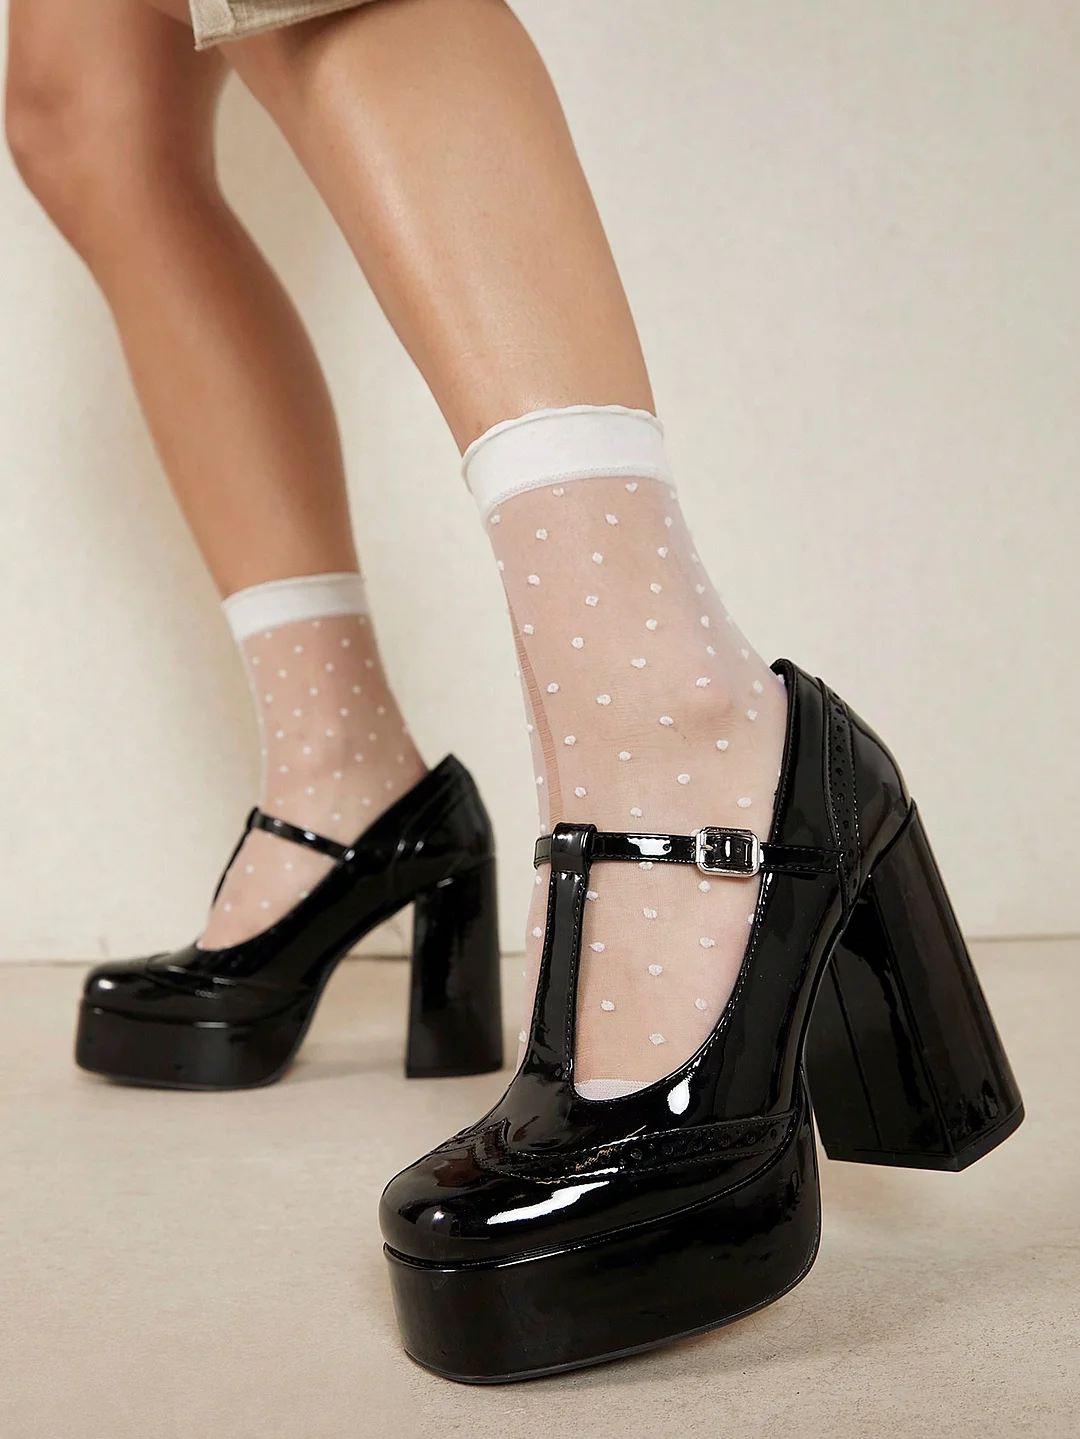 Black Patent Leather Closed Toe T-Strappy Platform Loafers With Chunky Heels Nicepairs